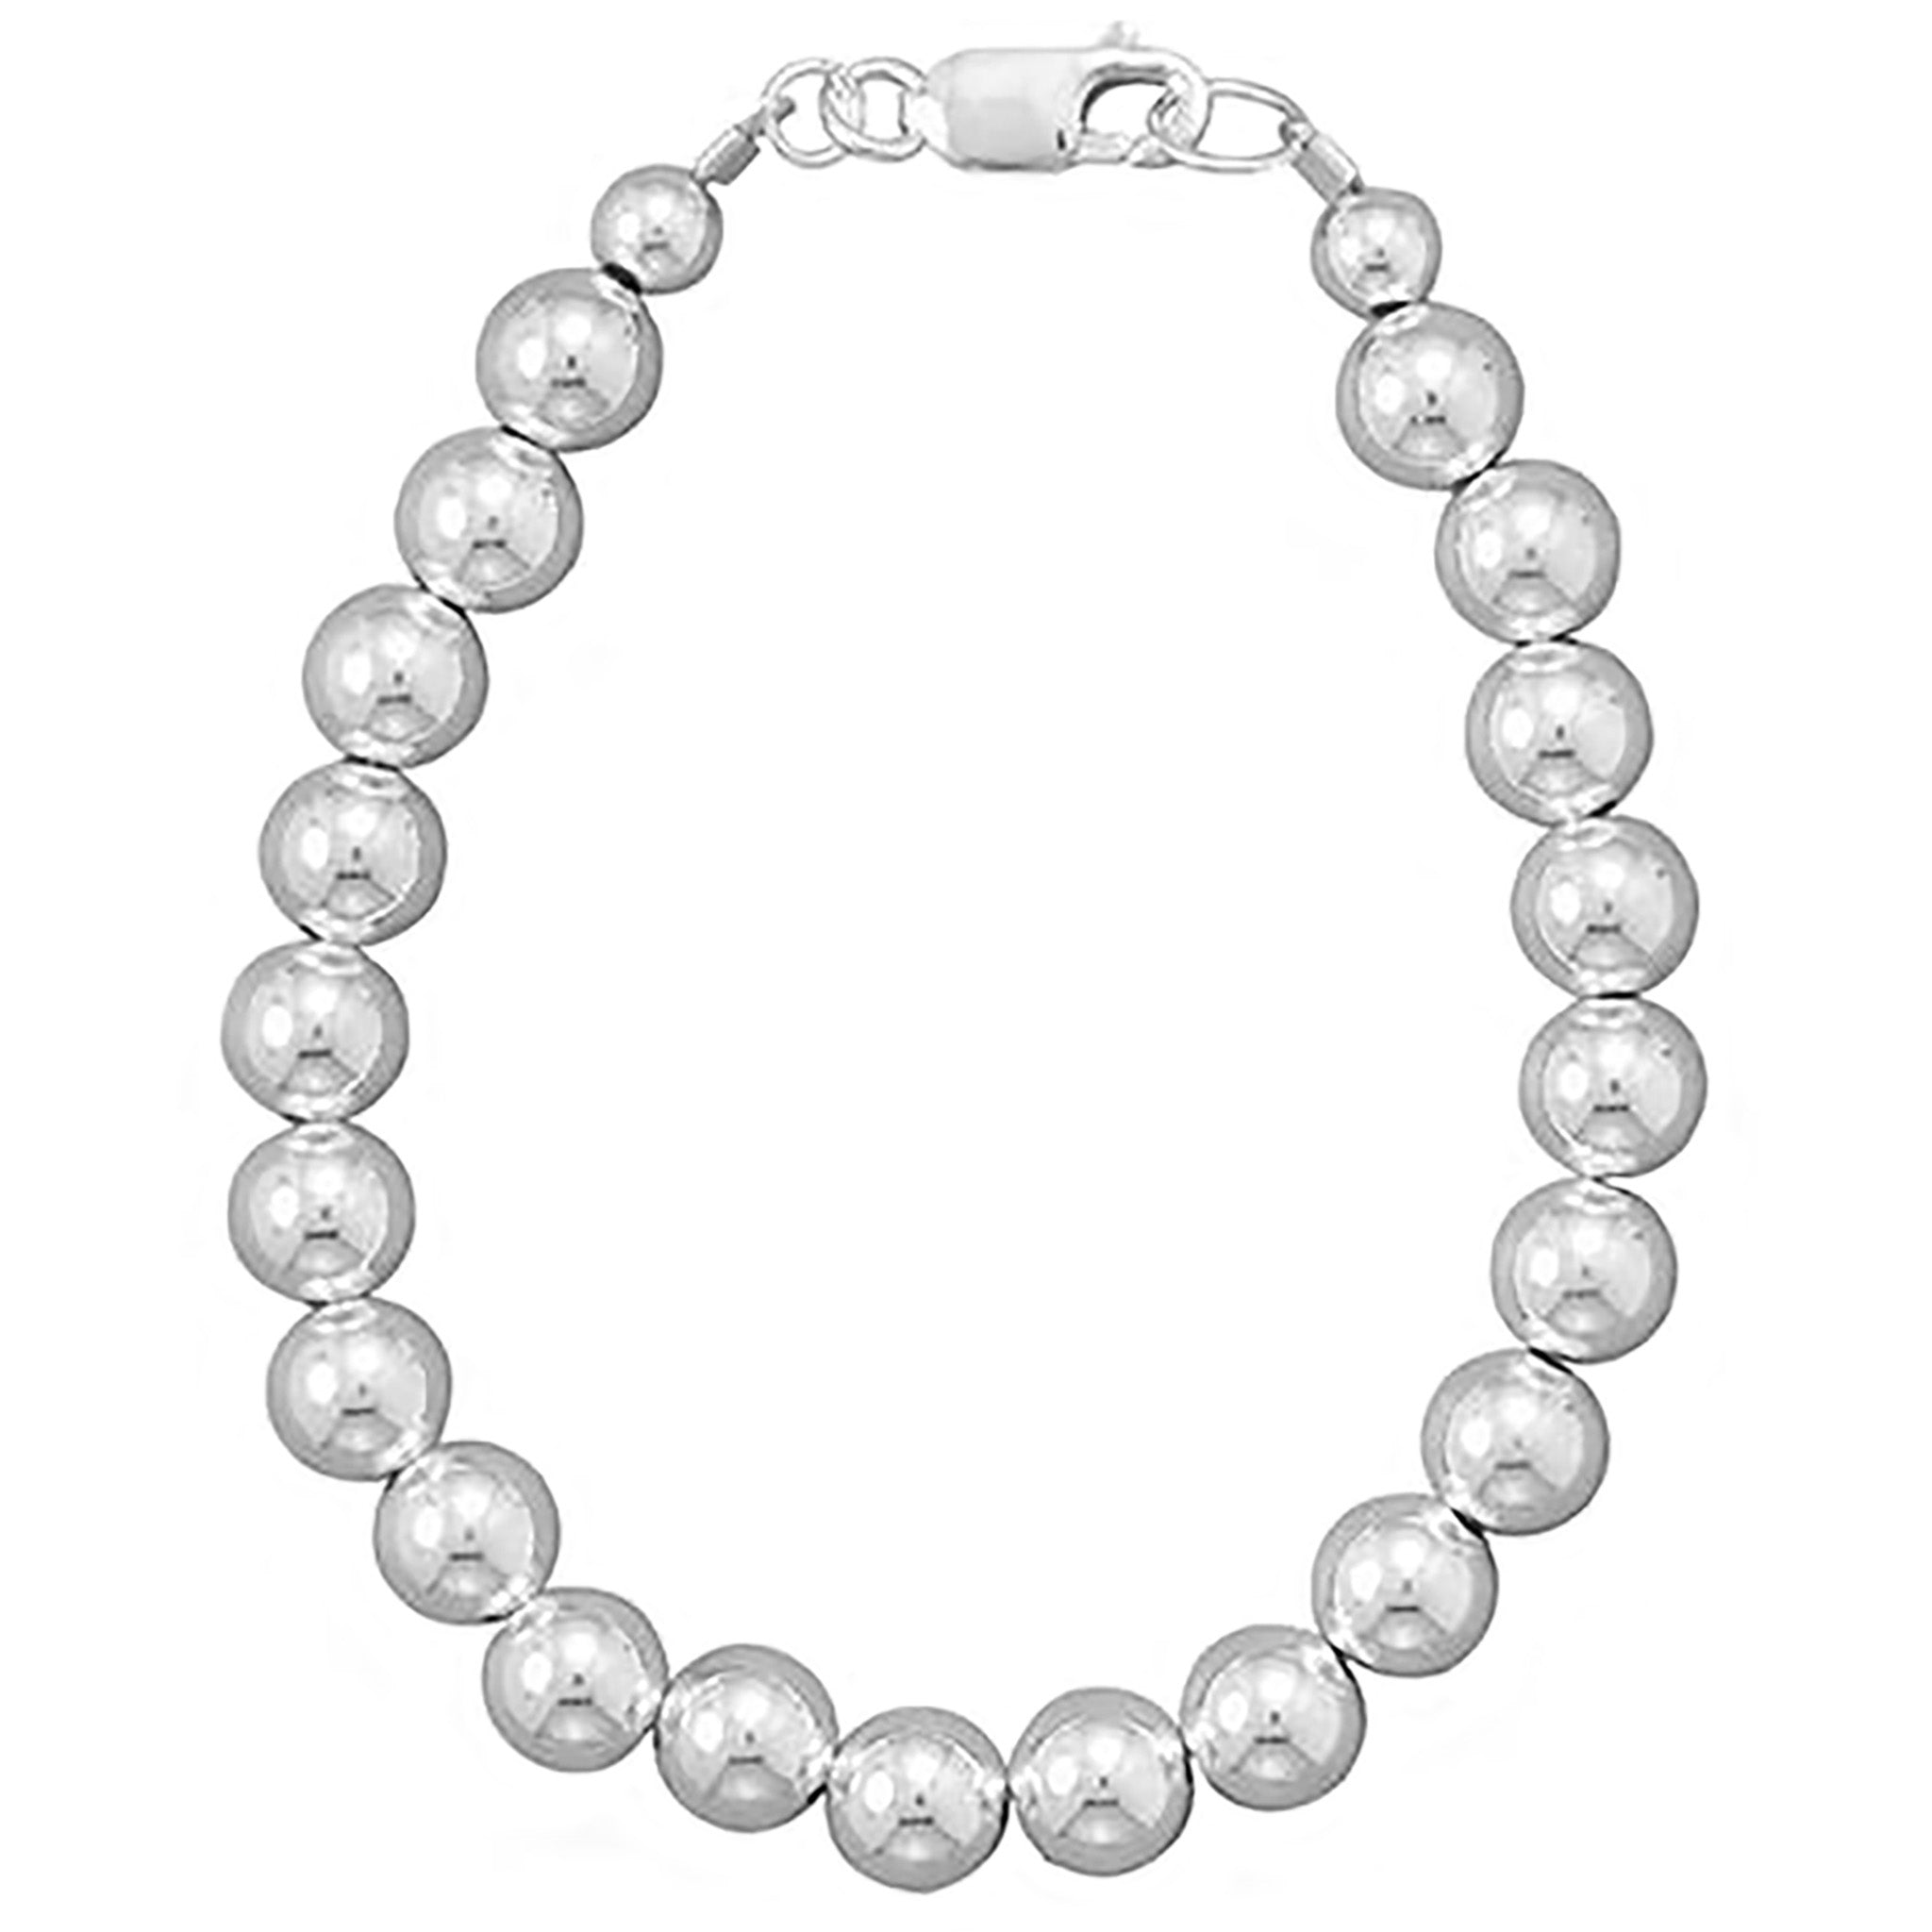 7mm Silver Bead Strand Necklace